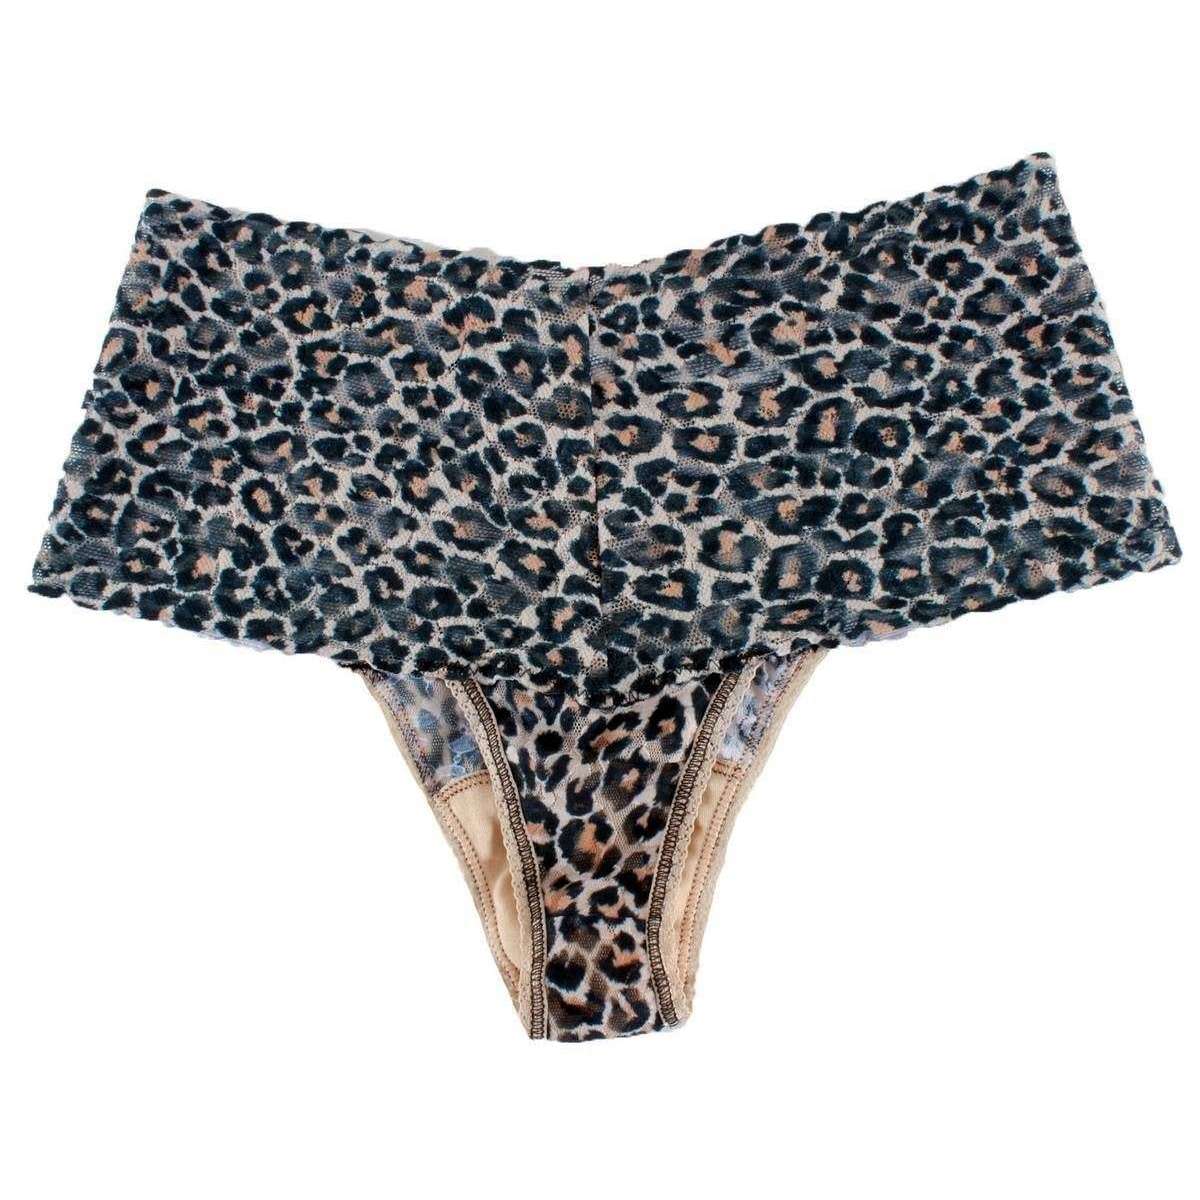 Leopard and Lace Panties with Cotton Crotch